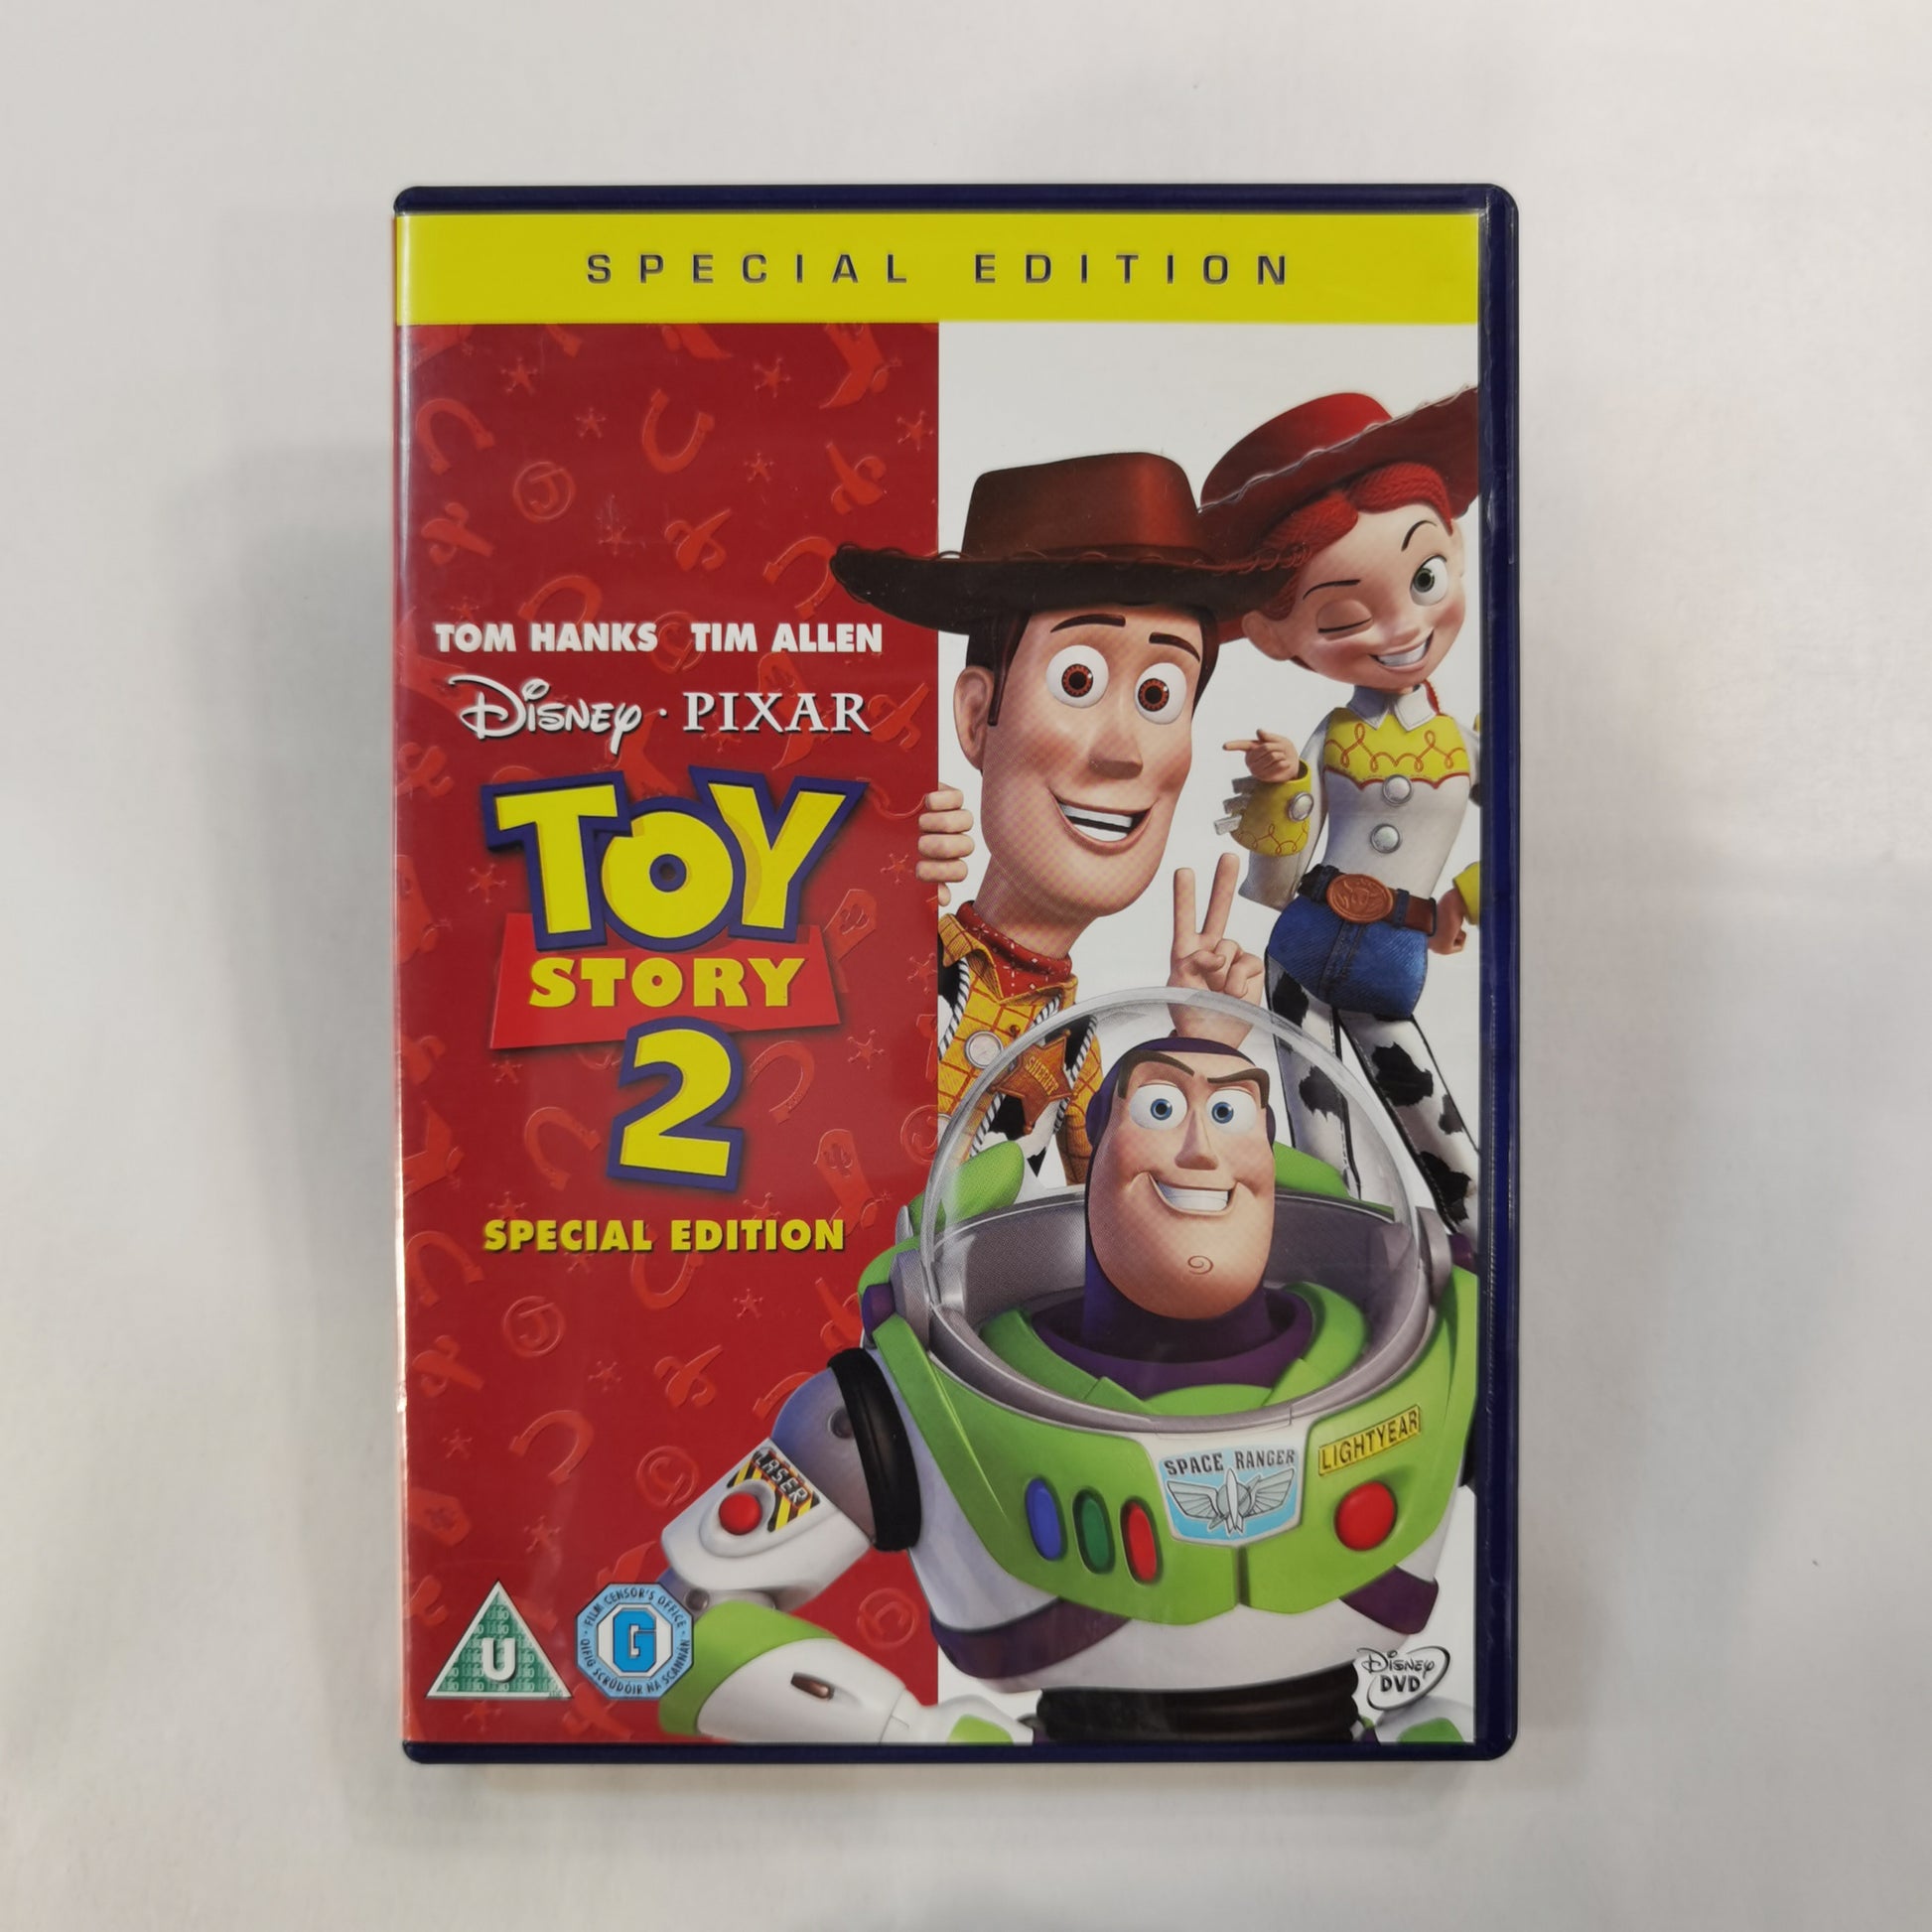 Toy Story (Special Edition) [DVD]